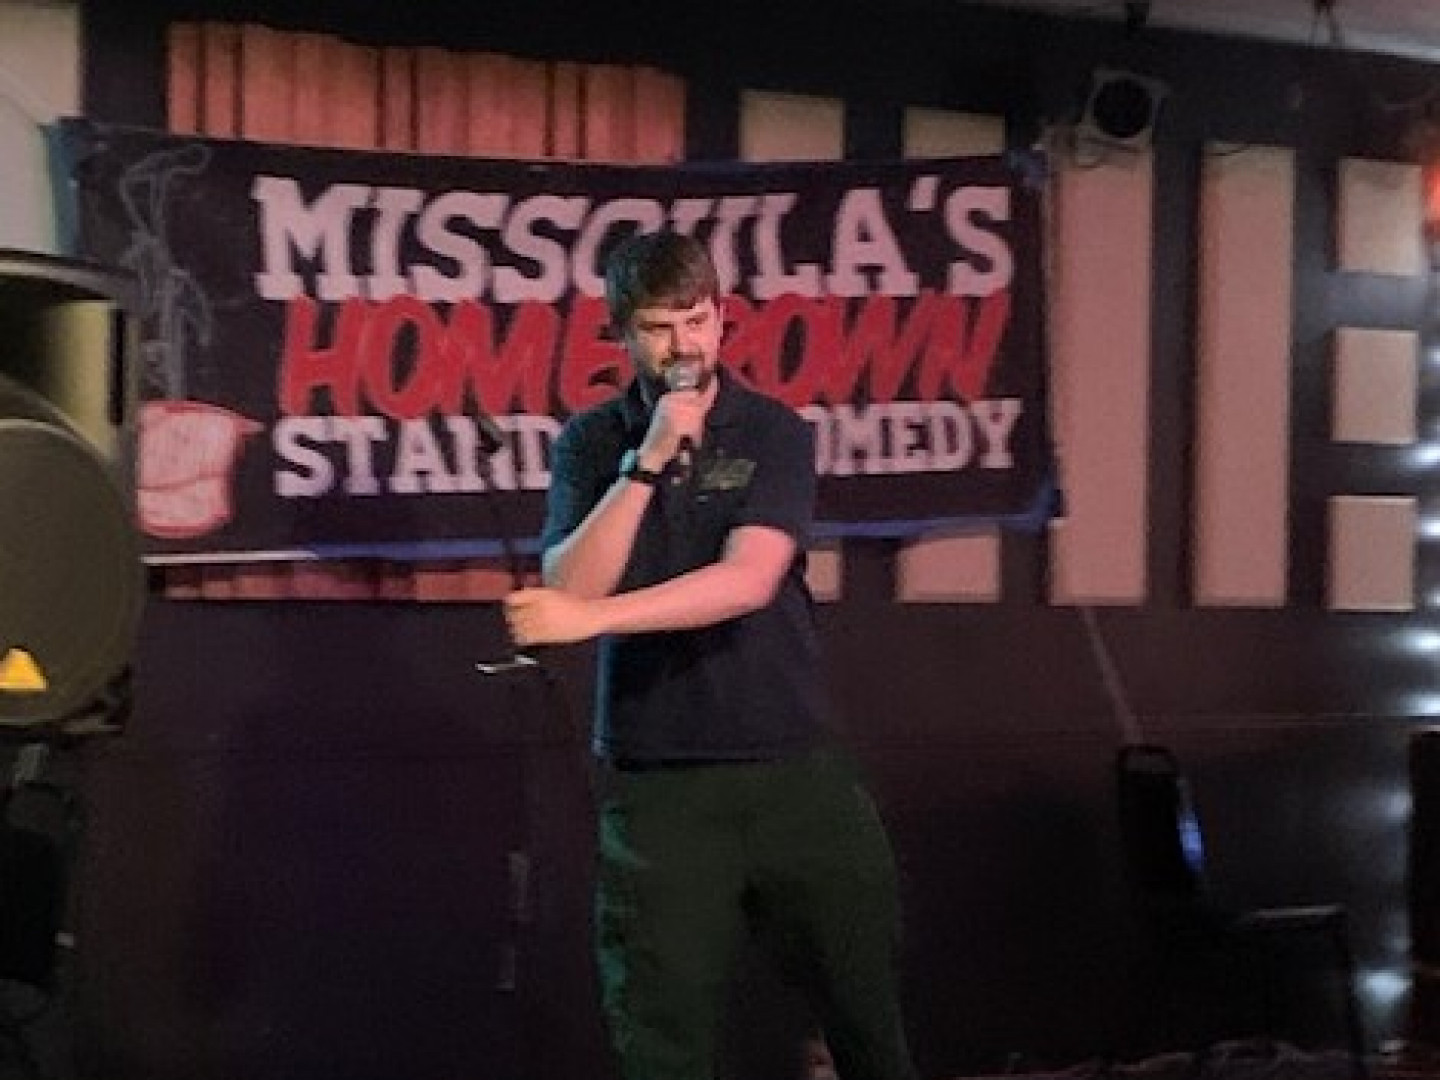 Missoula's Home Grown Stand Up Comedy-Open Mic